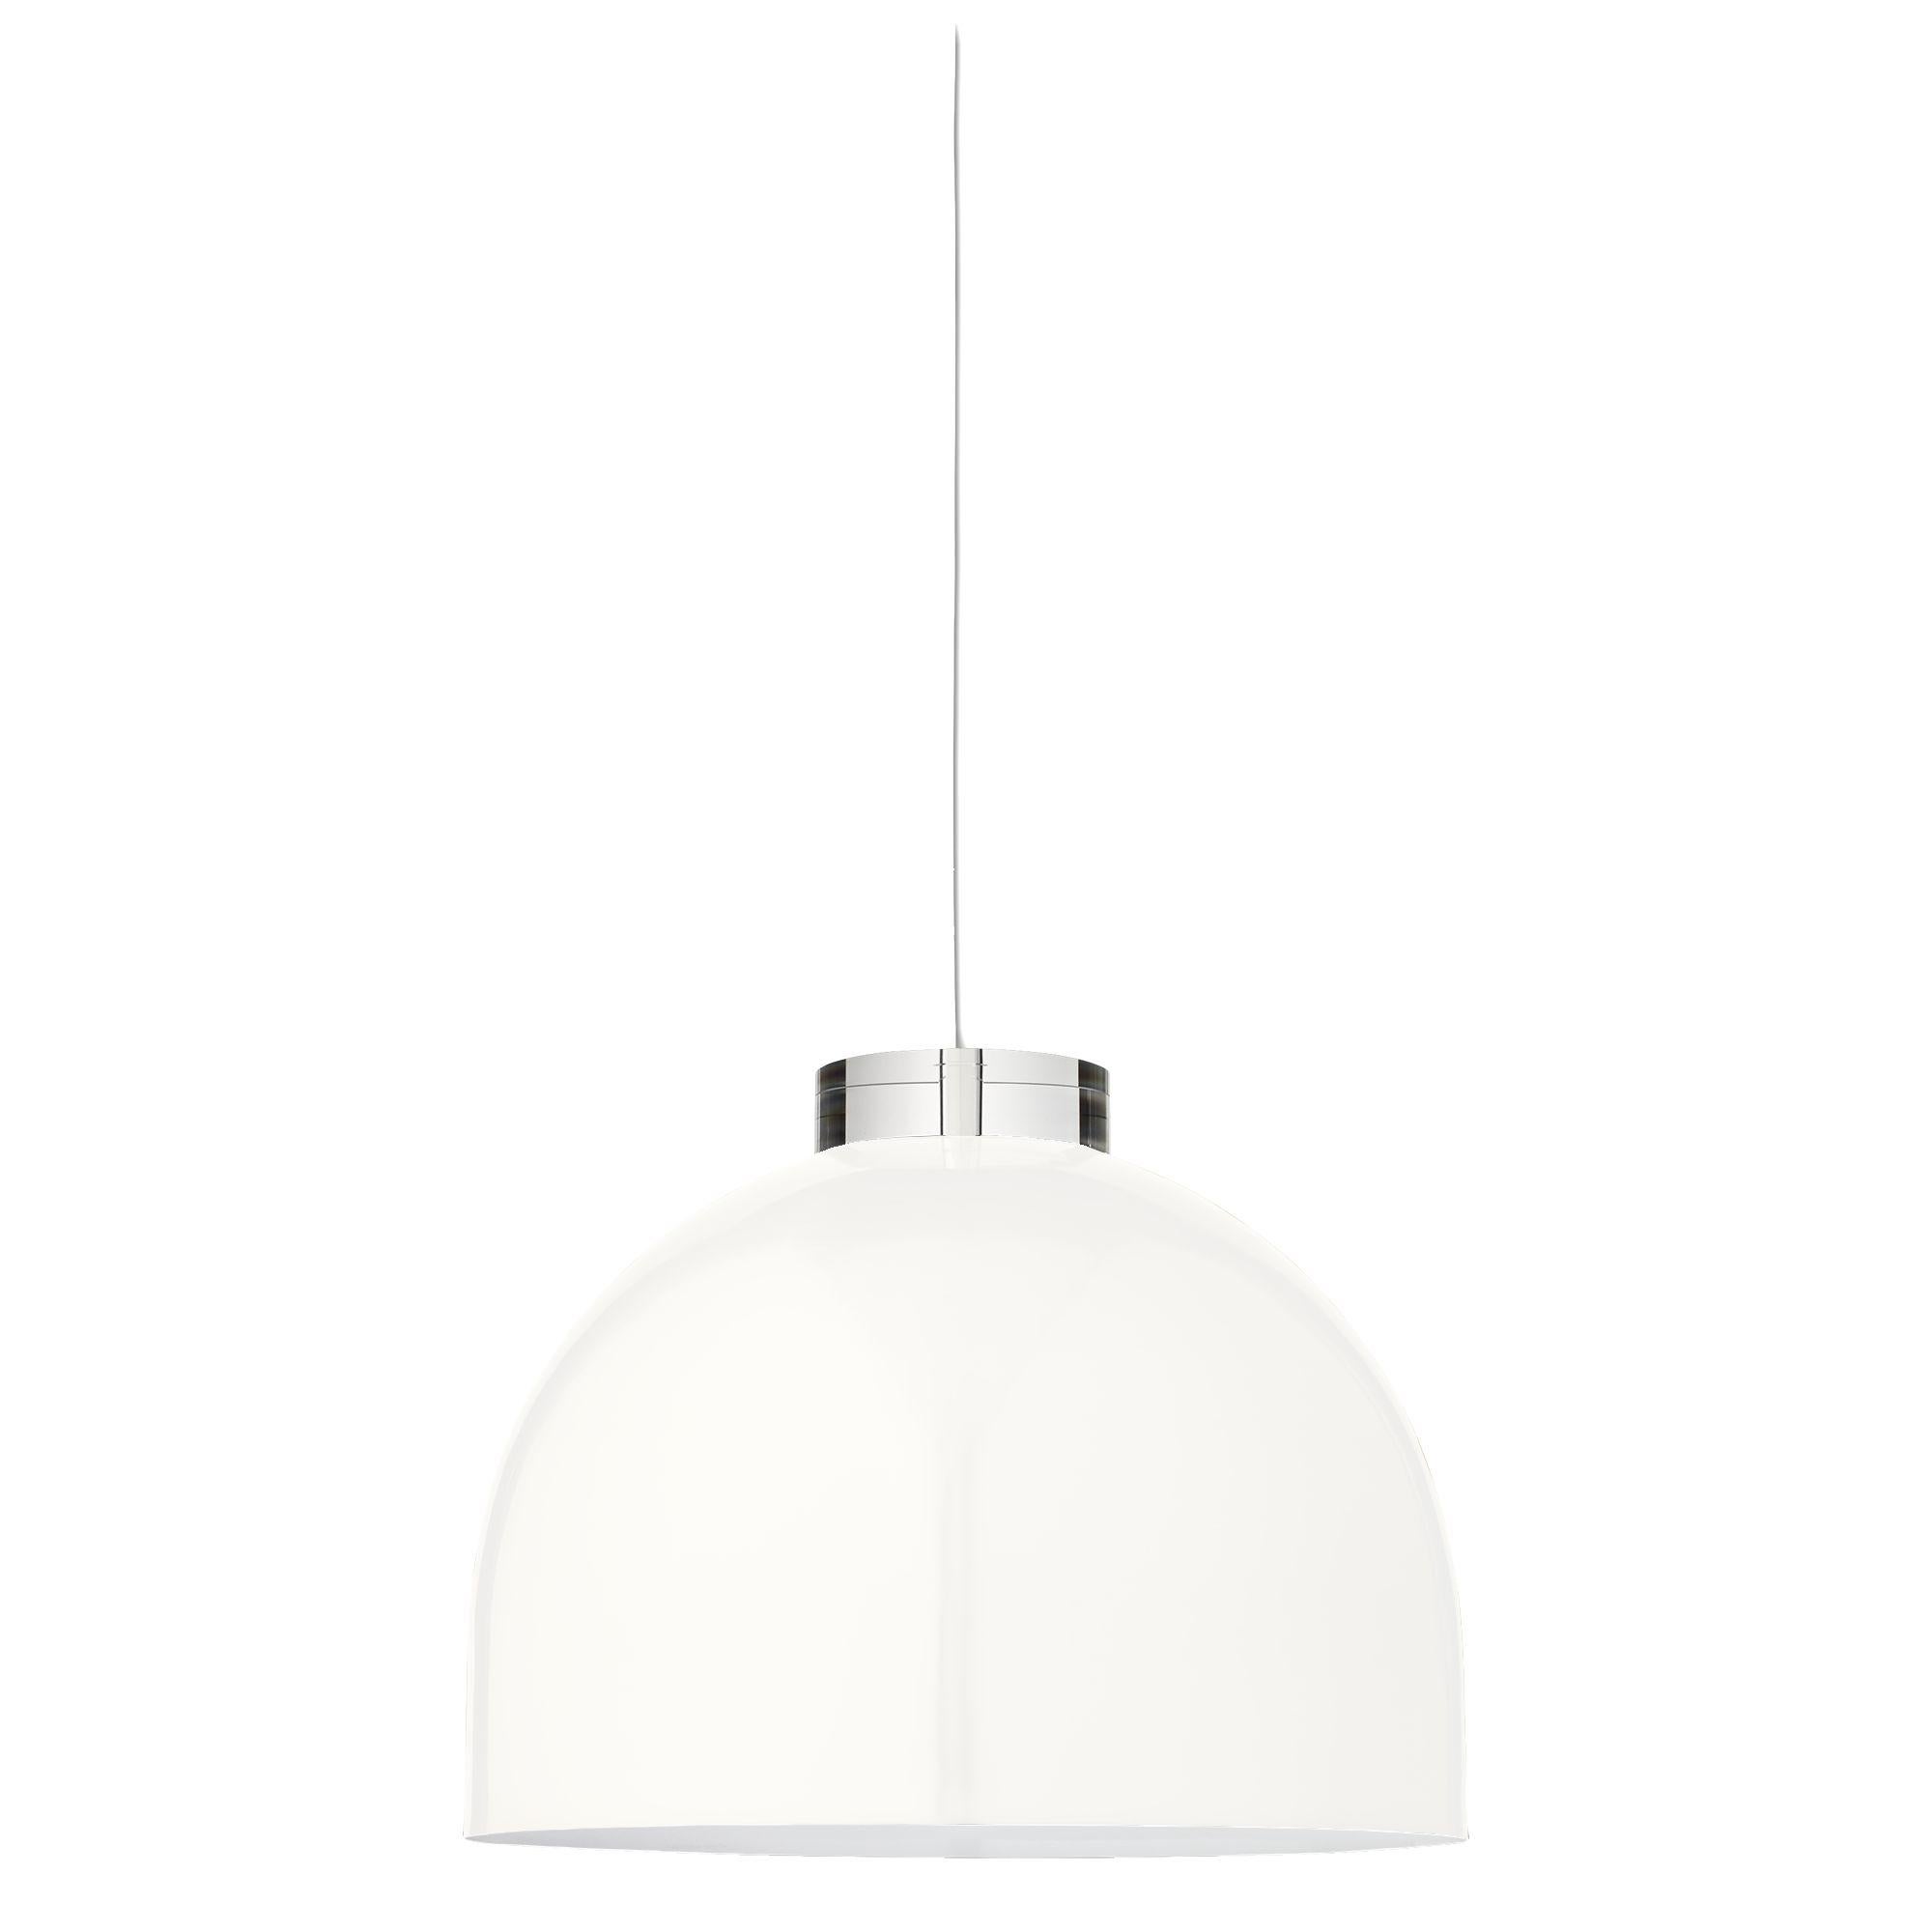 Large white round pendant lamp
Dimensions: Diameter 45 x height 36 cm
Materials: Glass, iron w. Brass plating & powder coating.
Details: For all lamps, the recommended light source is E27 max 25W&220/240 voltage. We recommend LED in order to